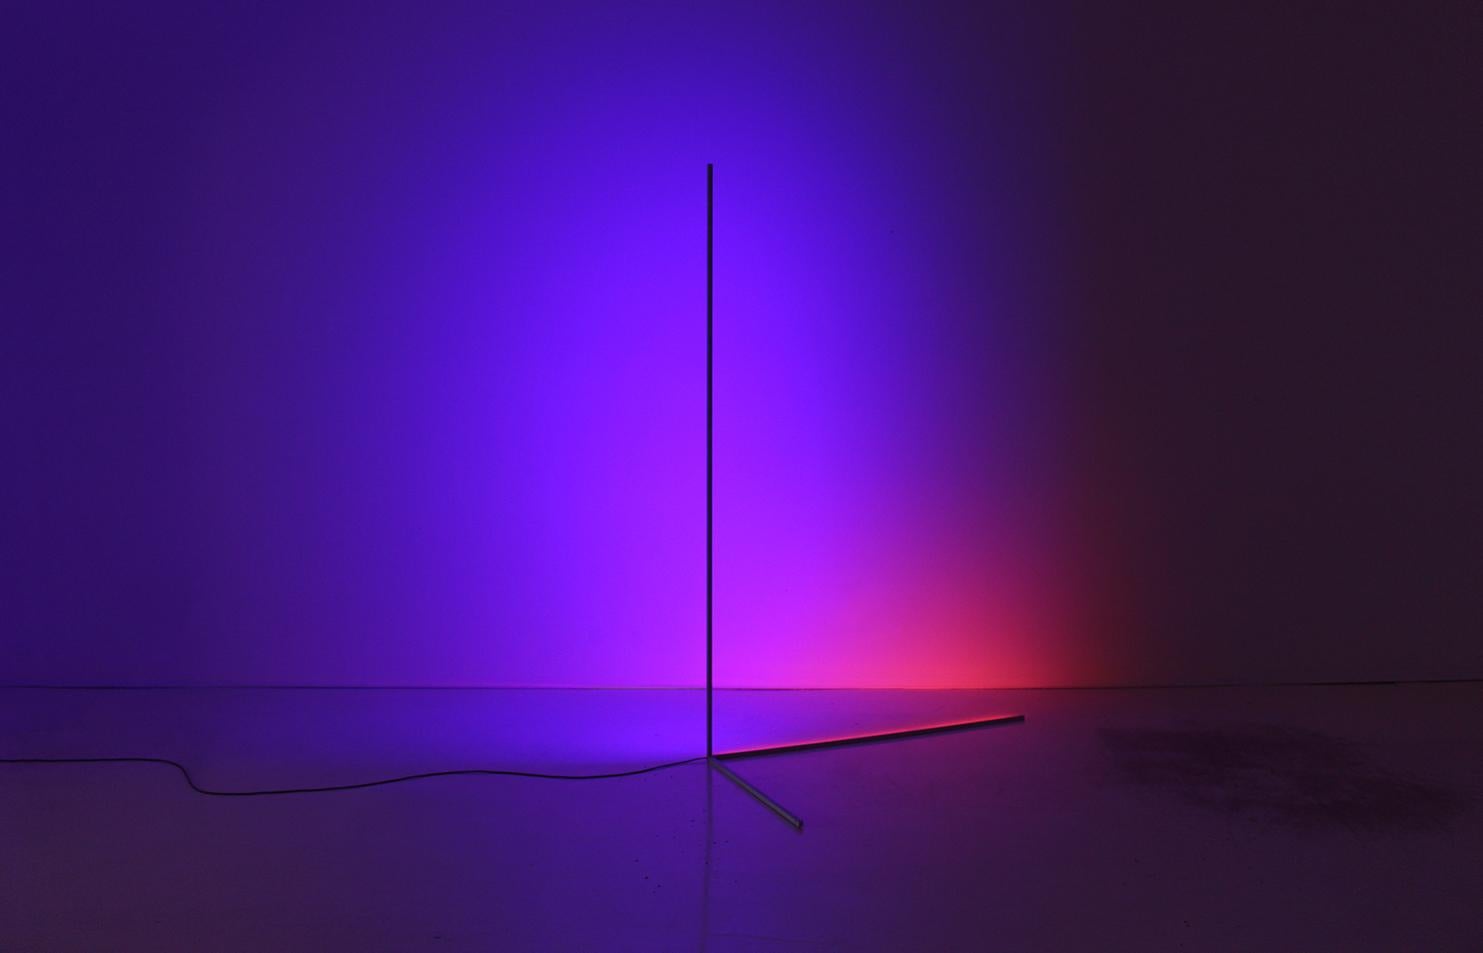 The freestanding light-form Axes derives its name from the mathematical term for dimensional reference lines. With its arms projected into three distinct dimensions, it is able to be oriented in many ways, achieving unique compositional effects. The